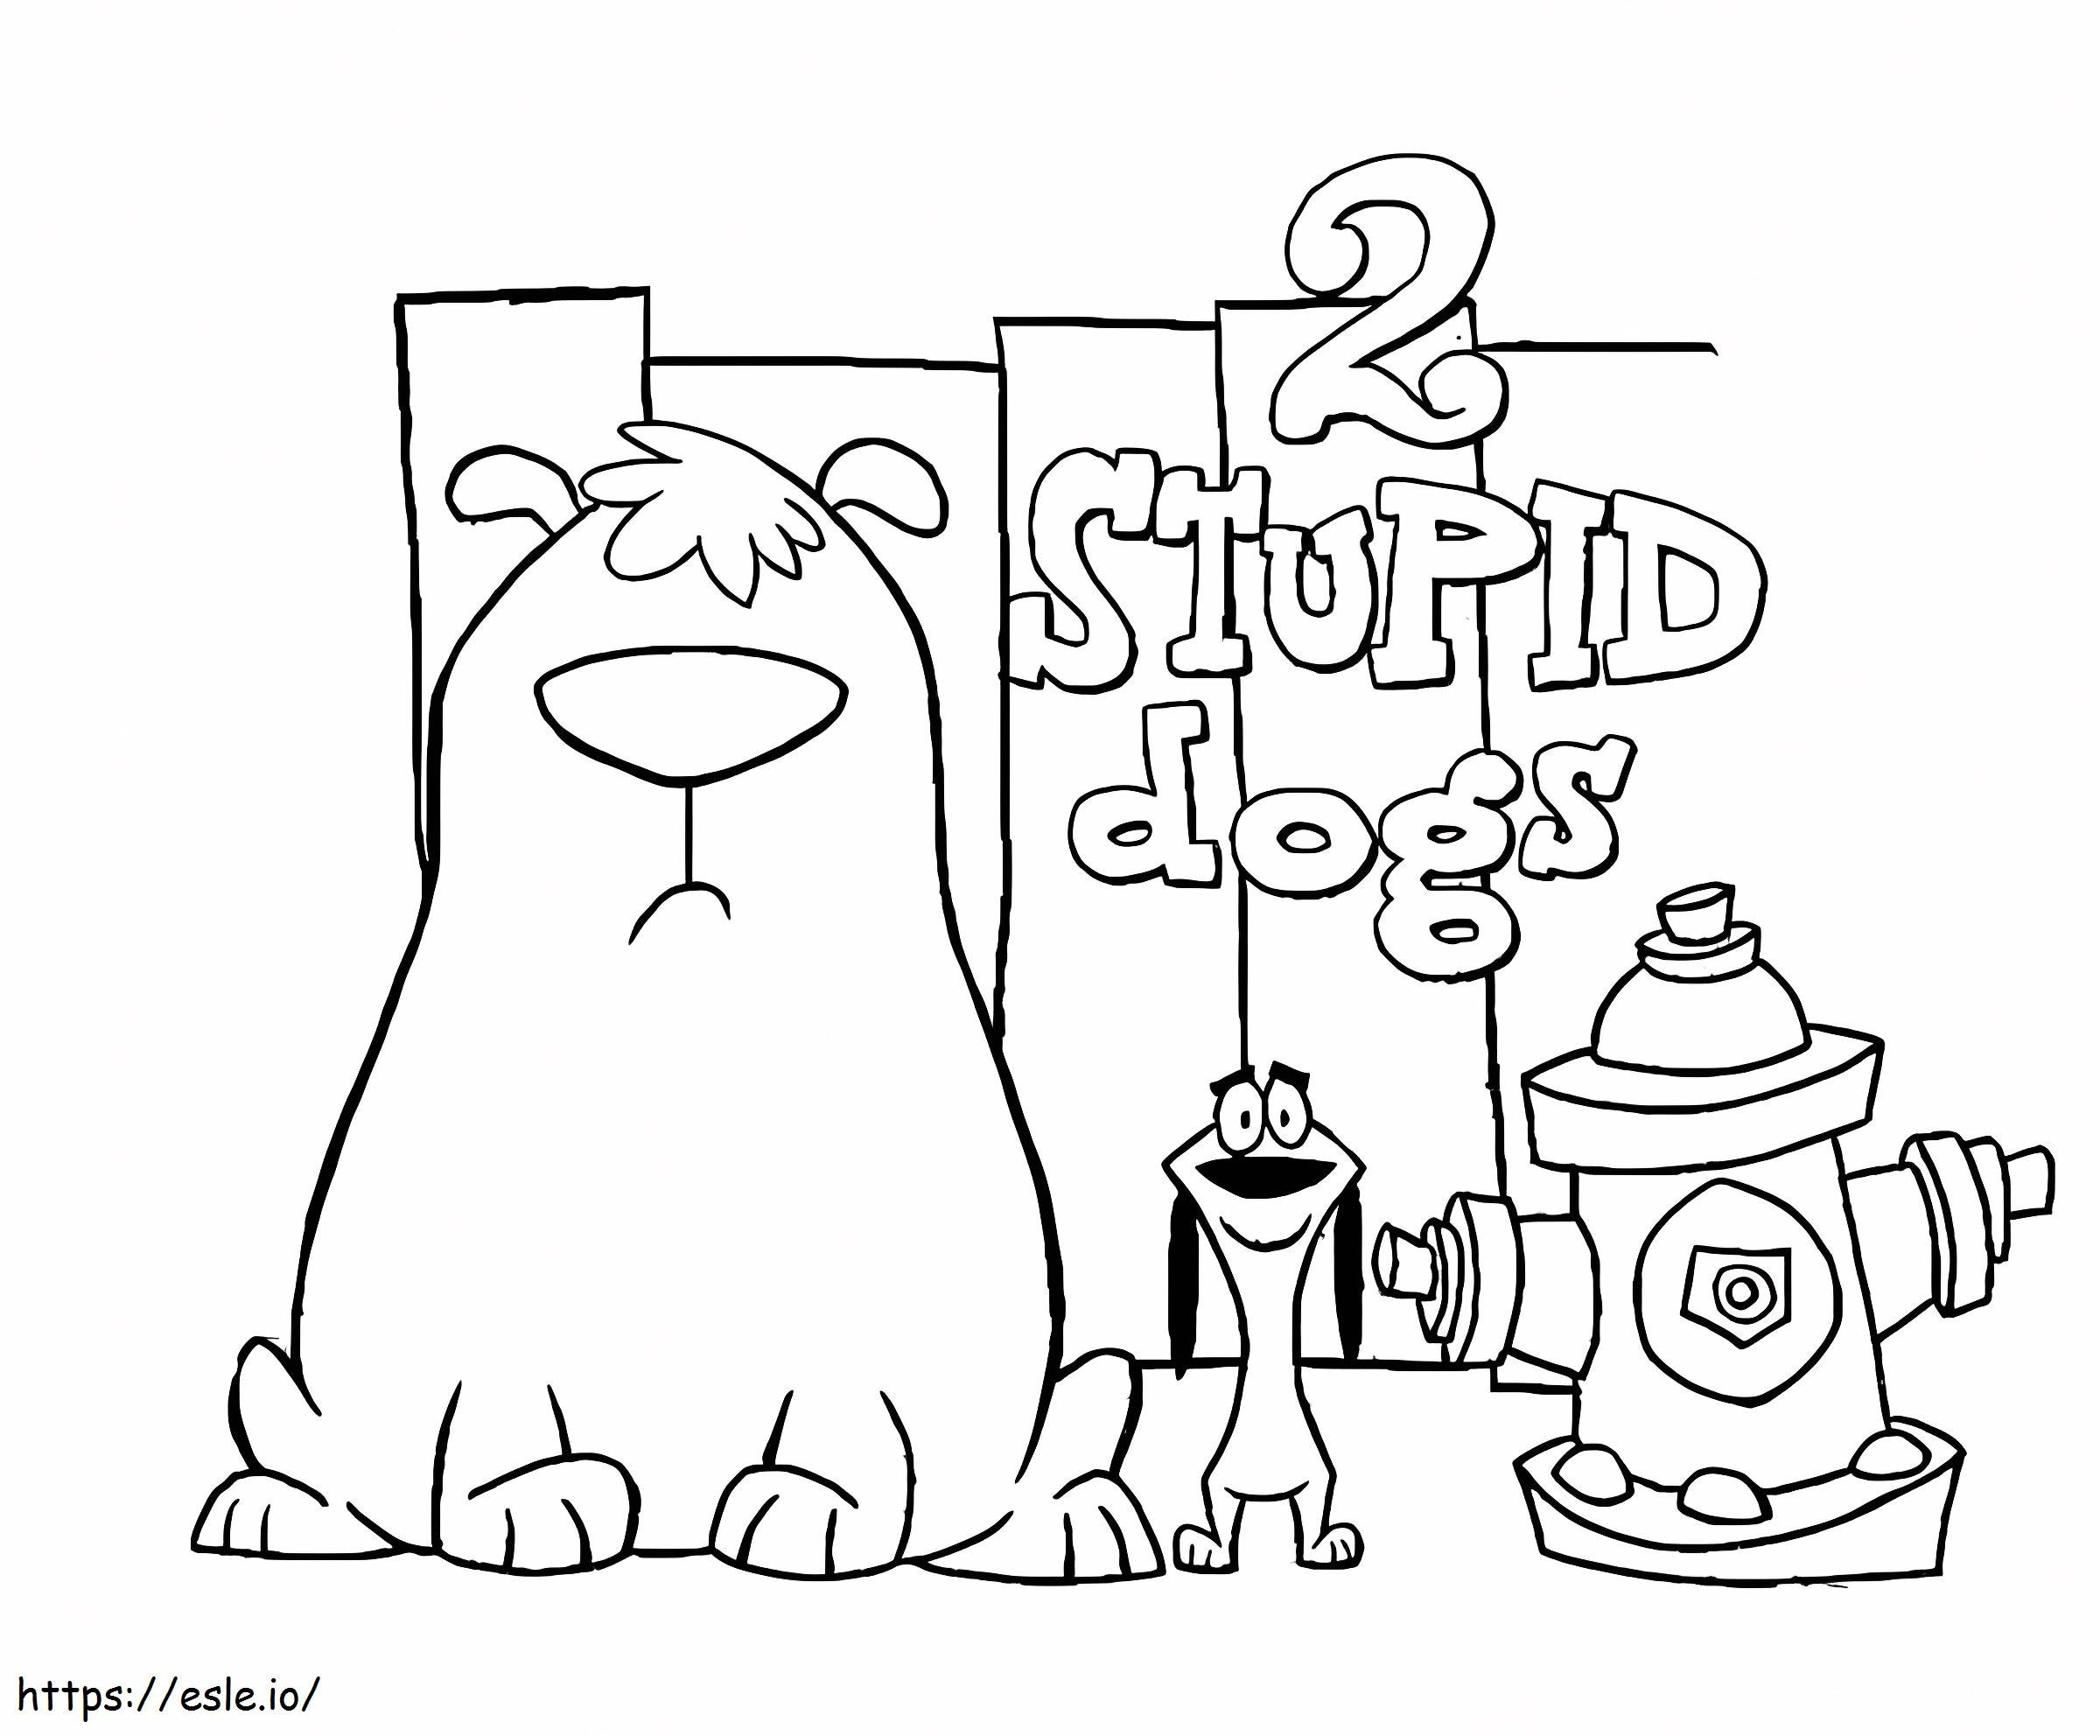 Free Printable 2 Stupid Dogs coloring page